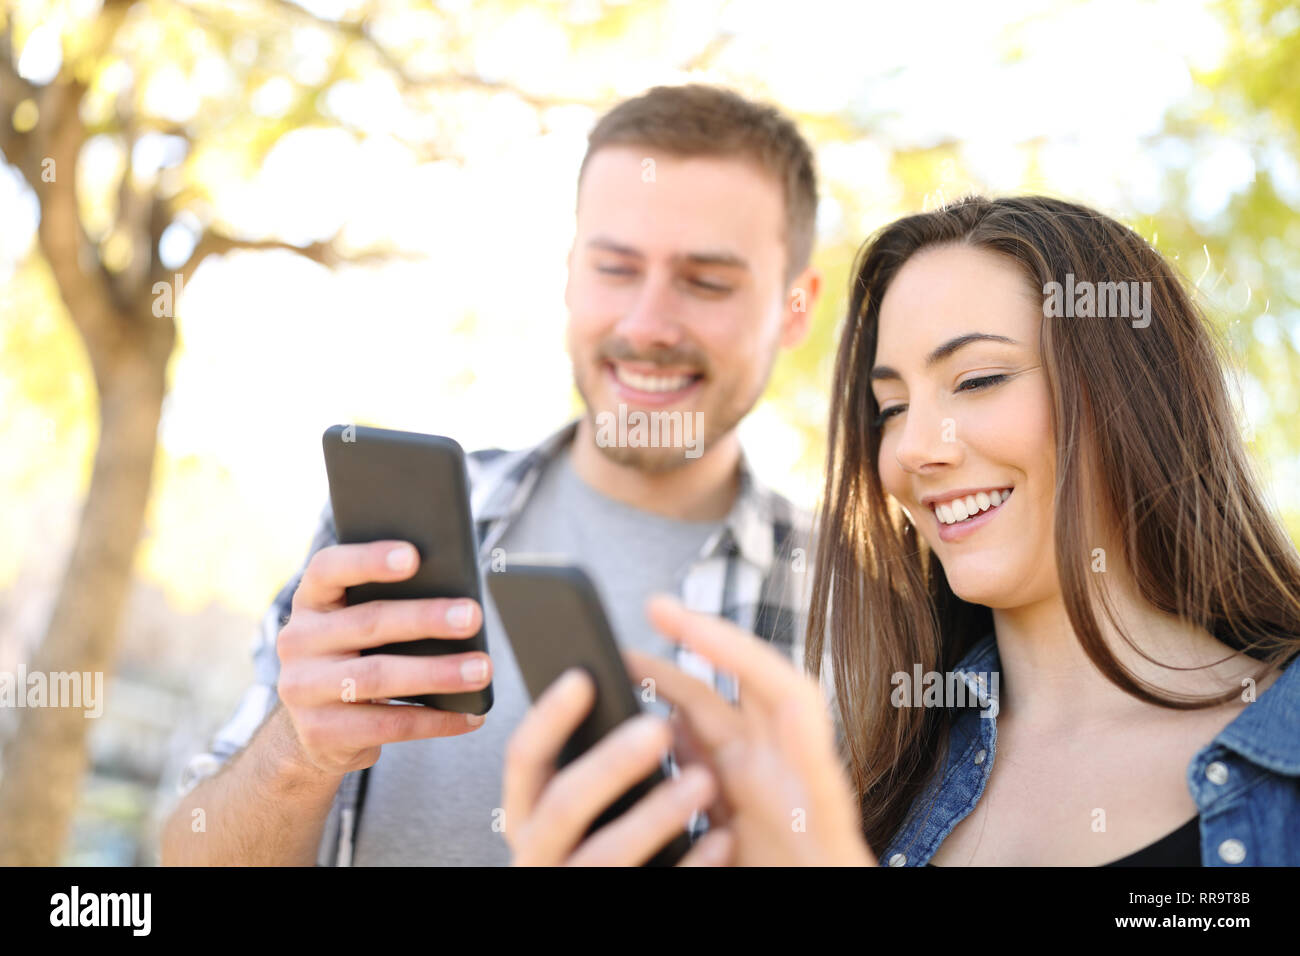 Two happy friends using their smart phones standing outdoors in a park Stock Photo